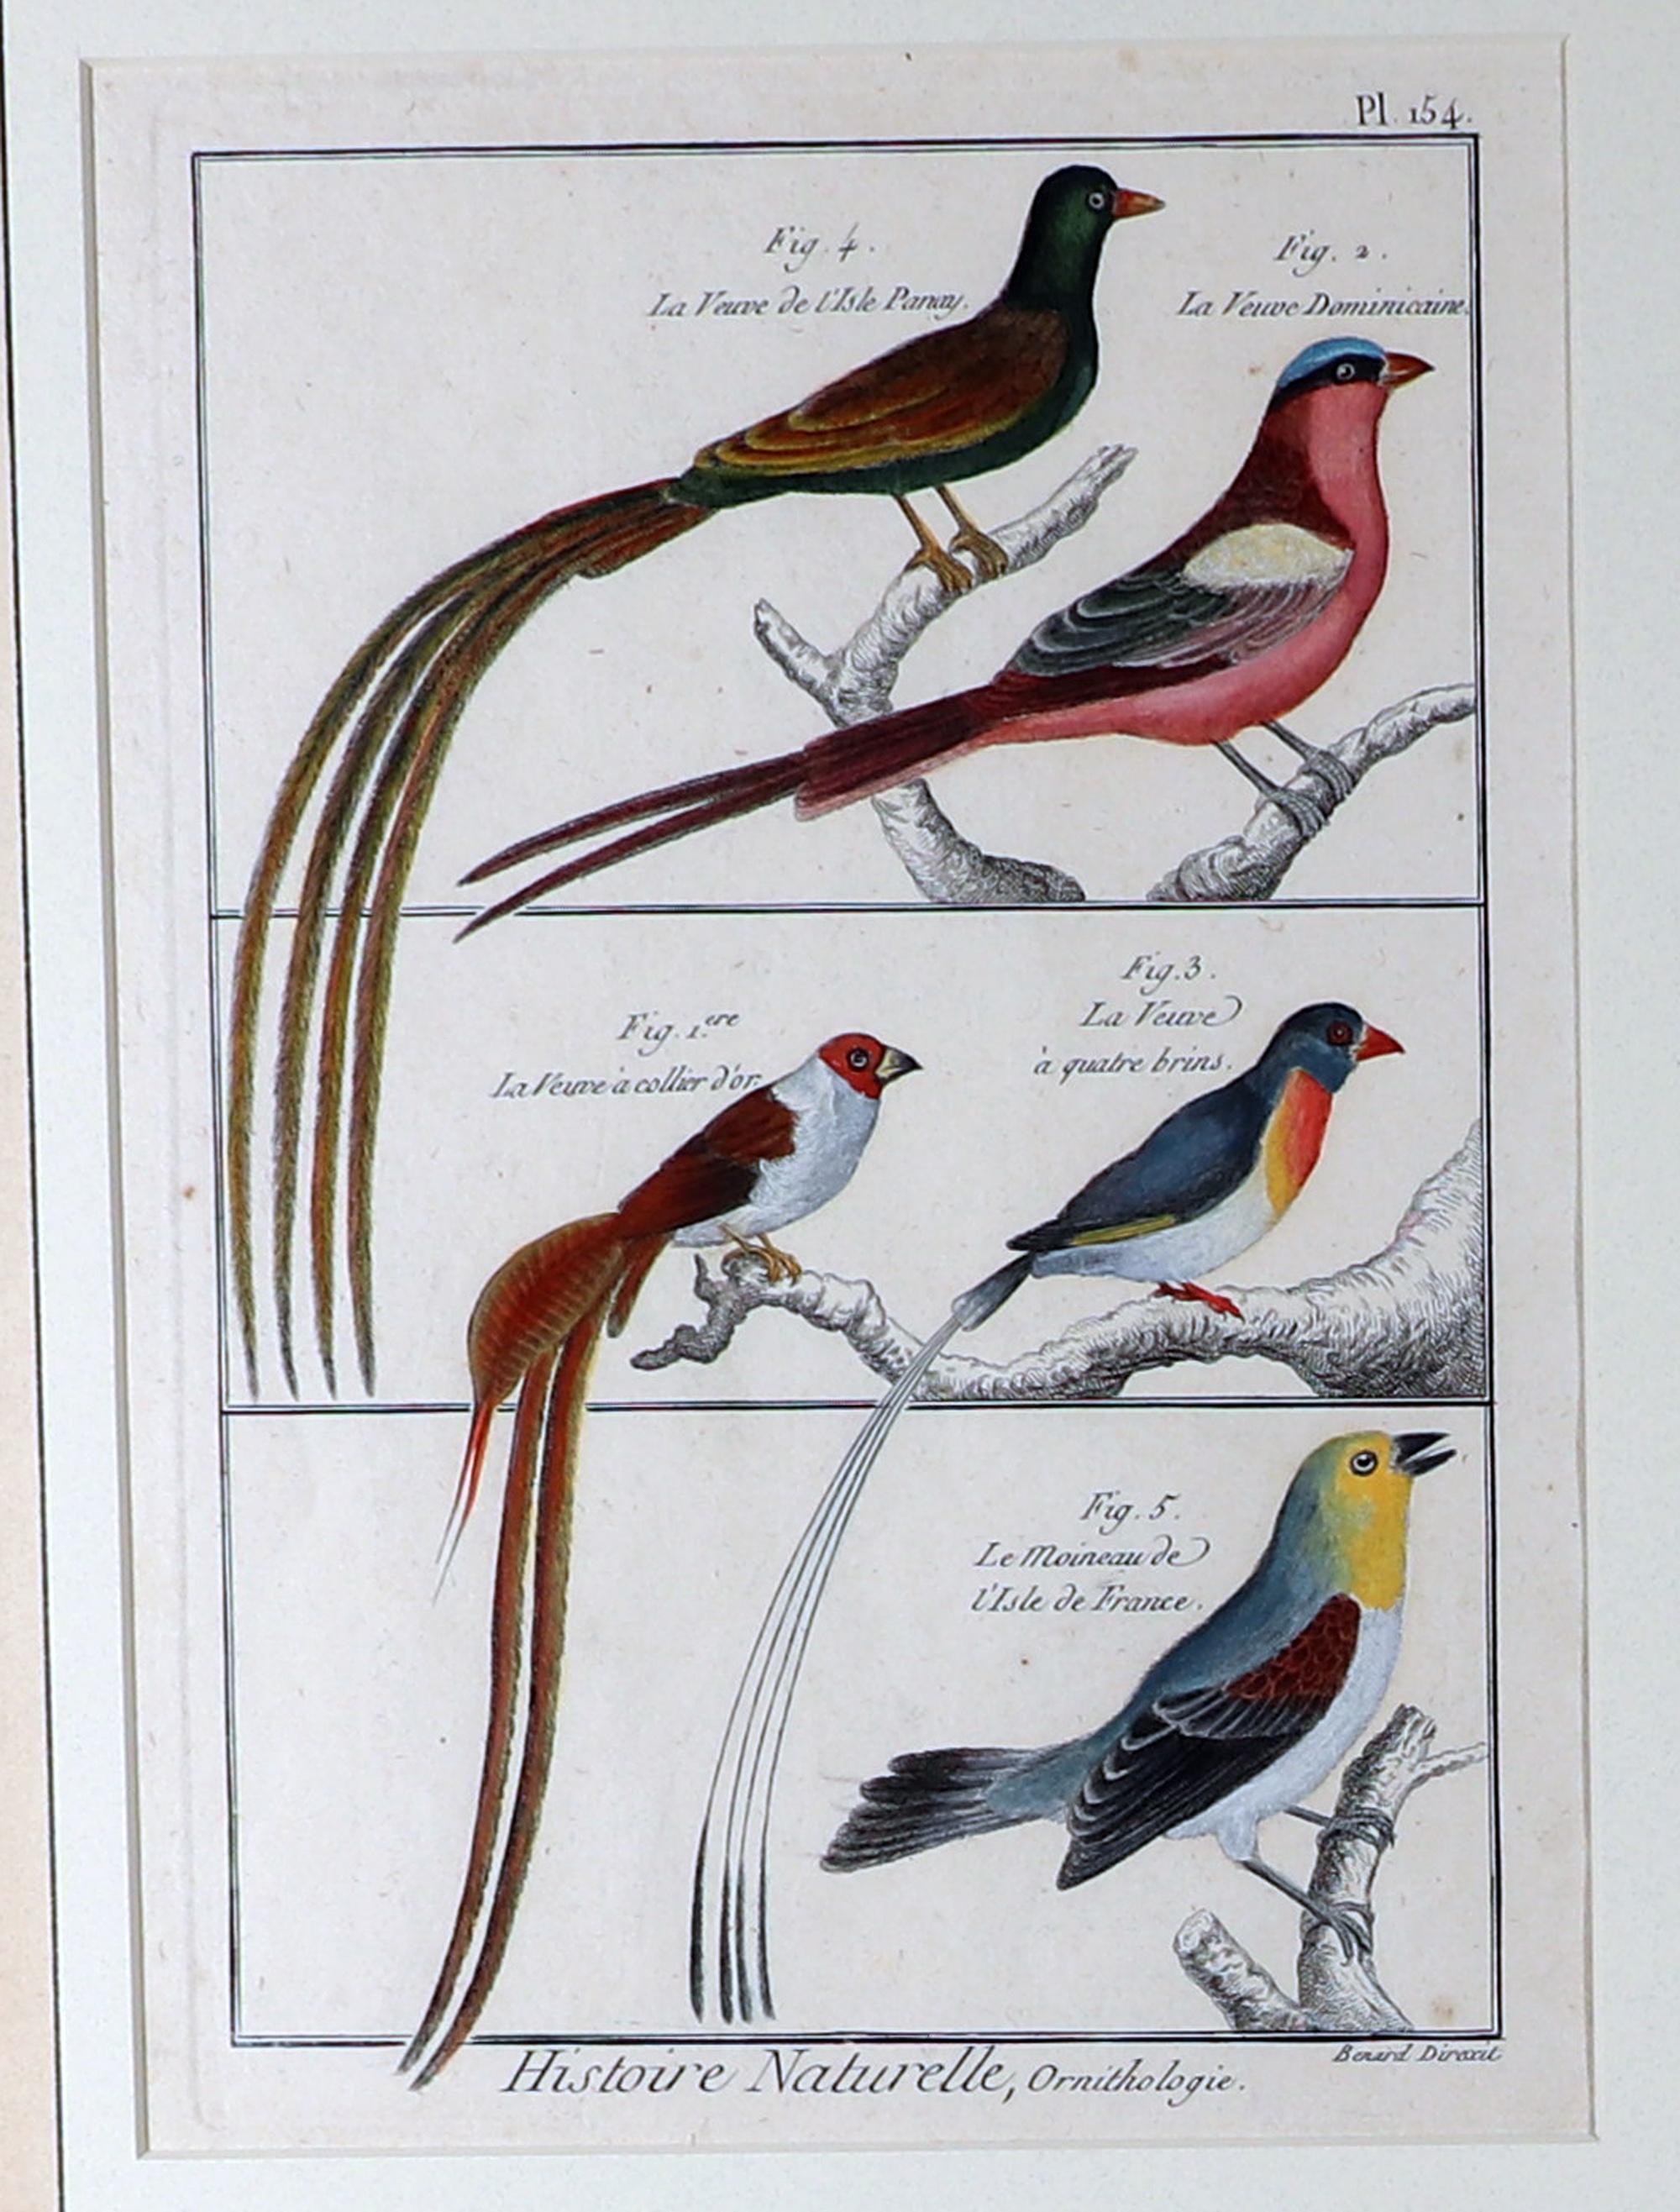 Charming Framed group of bird engravings,
Histoire Naturelle, Ornithologie by Georges-Louis Leclerc,
Circa 1780

The beautiful ornithological engravings are from Histoire Naturelle, Ornithologie by Georges-Louis Leclerc, each with page number